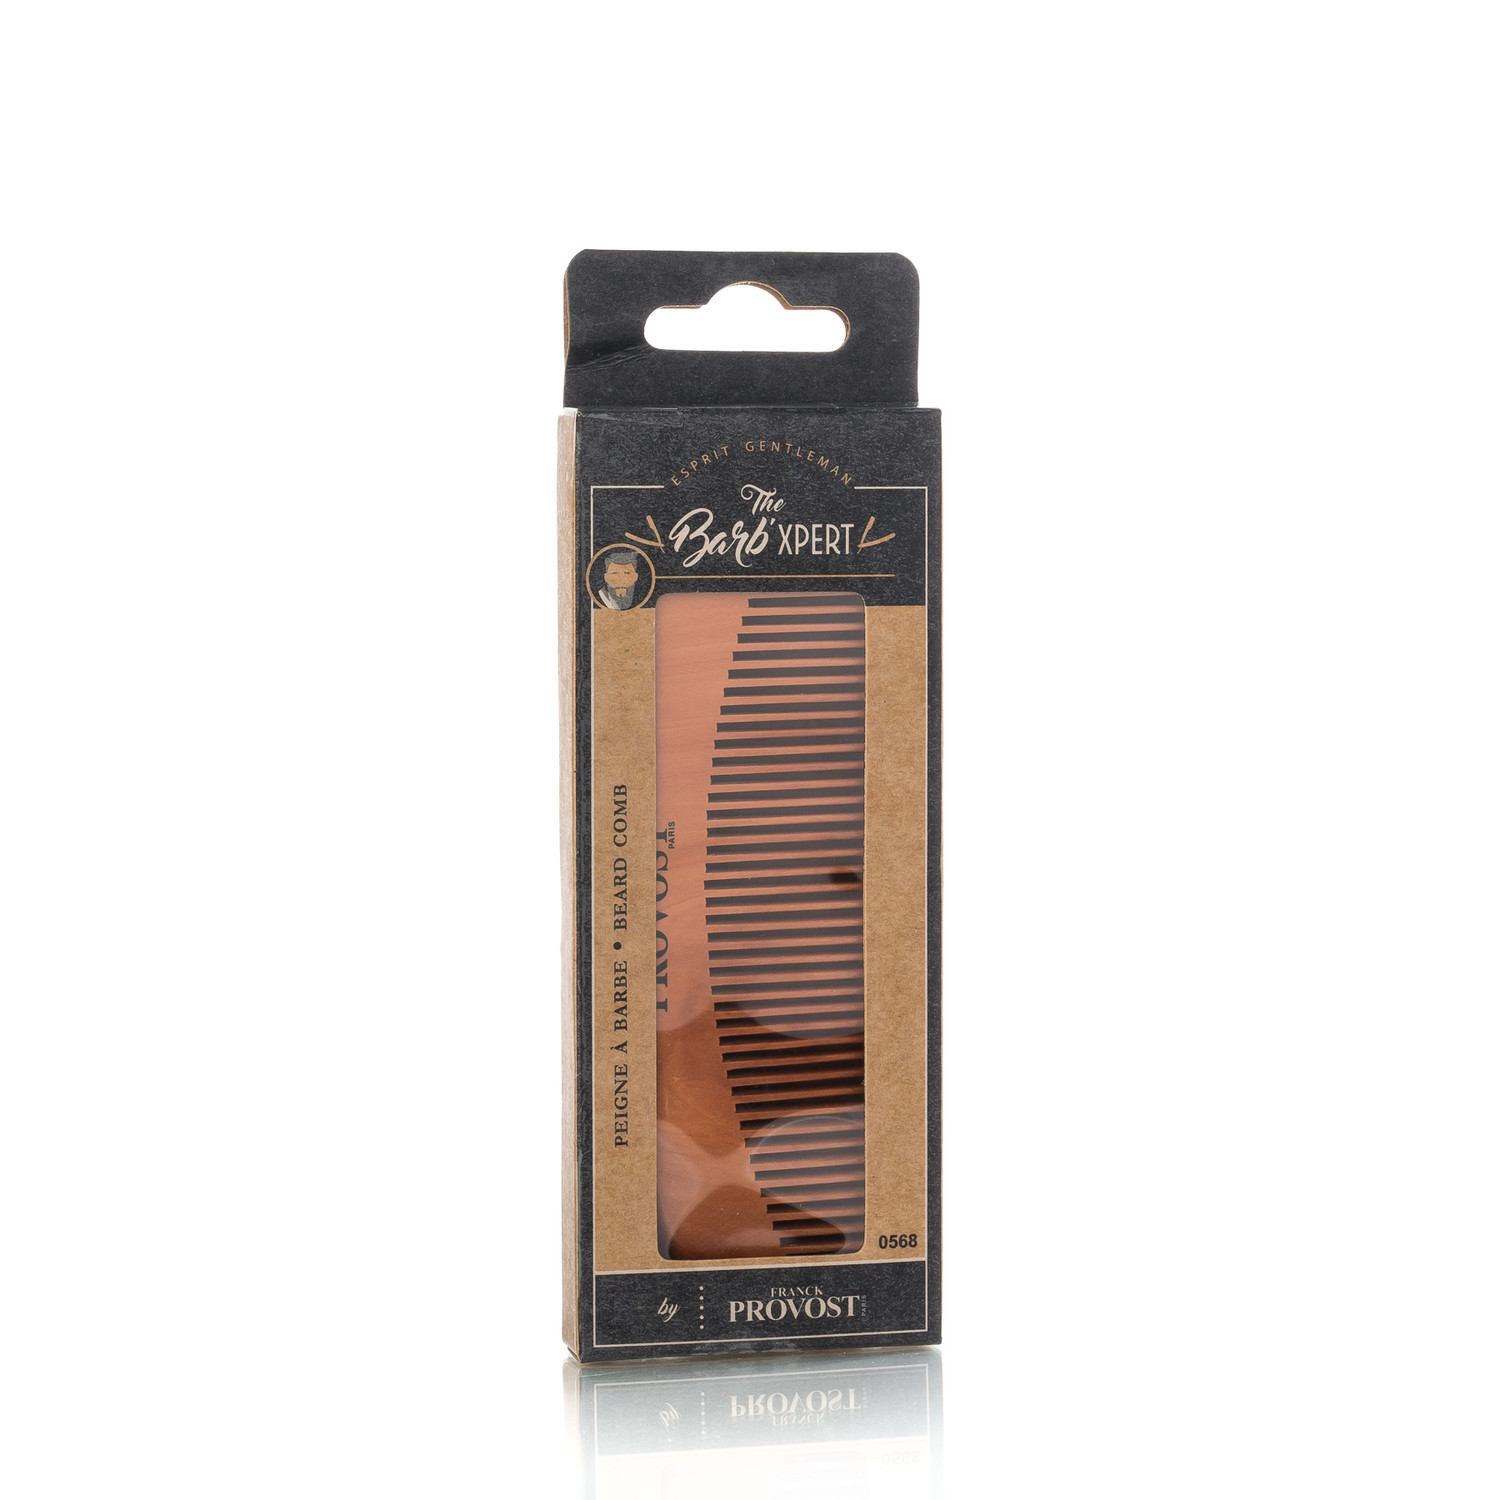 Beard Comb + Brush Duo - The Barb 'Xpert by Franck Provost - Touch of ...